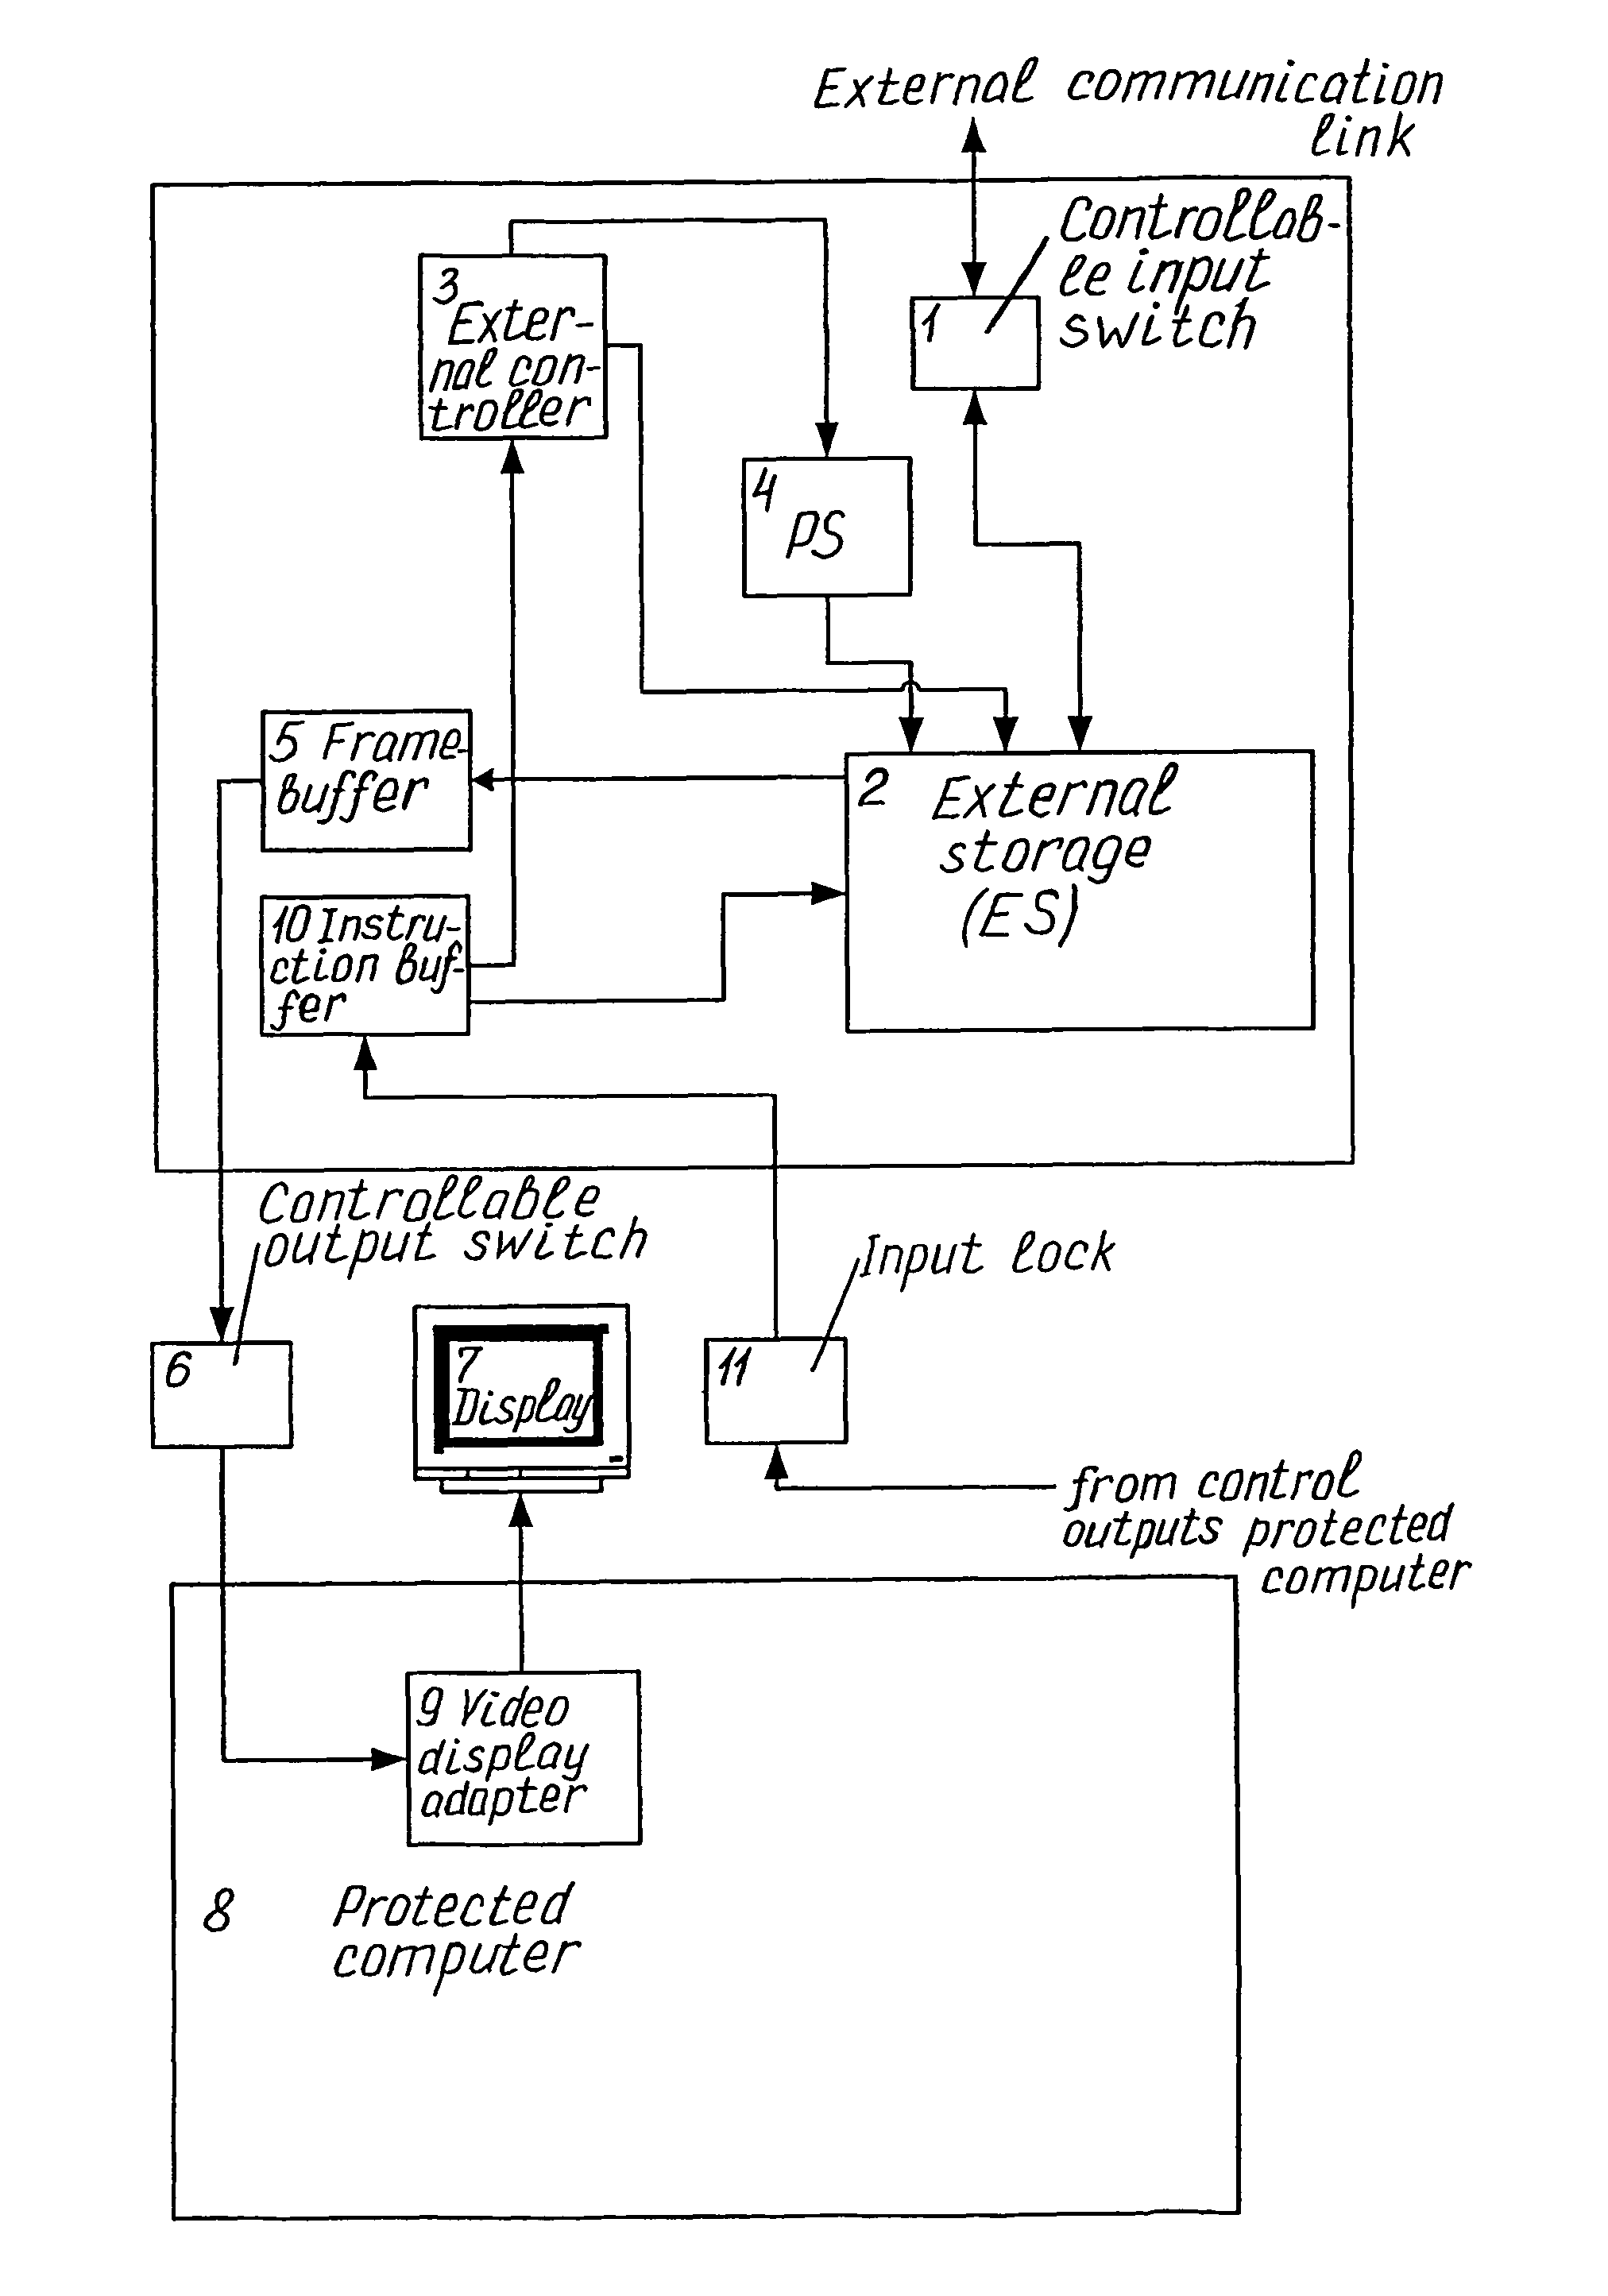 Method and device for computer memory protection against unauthorized access